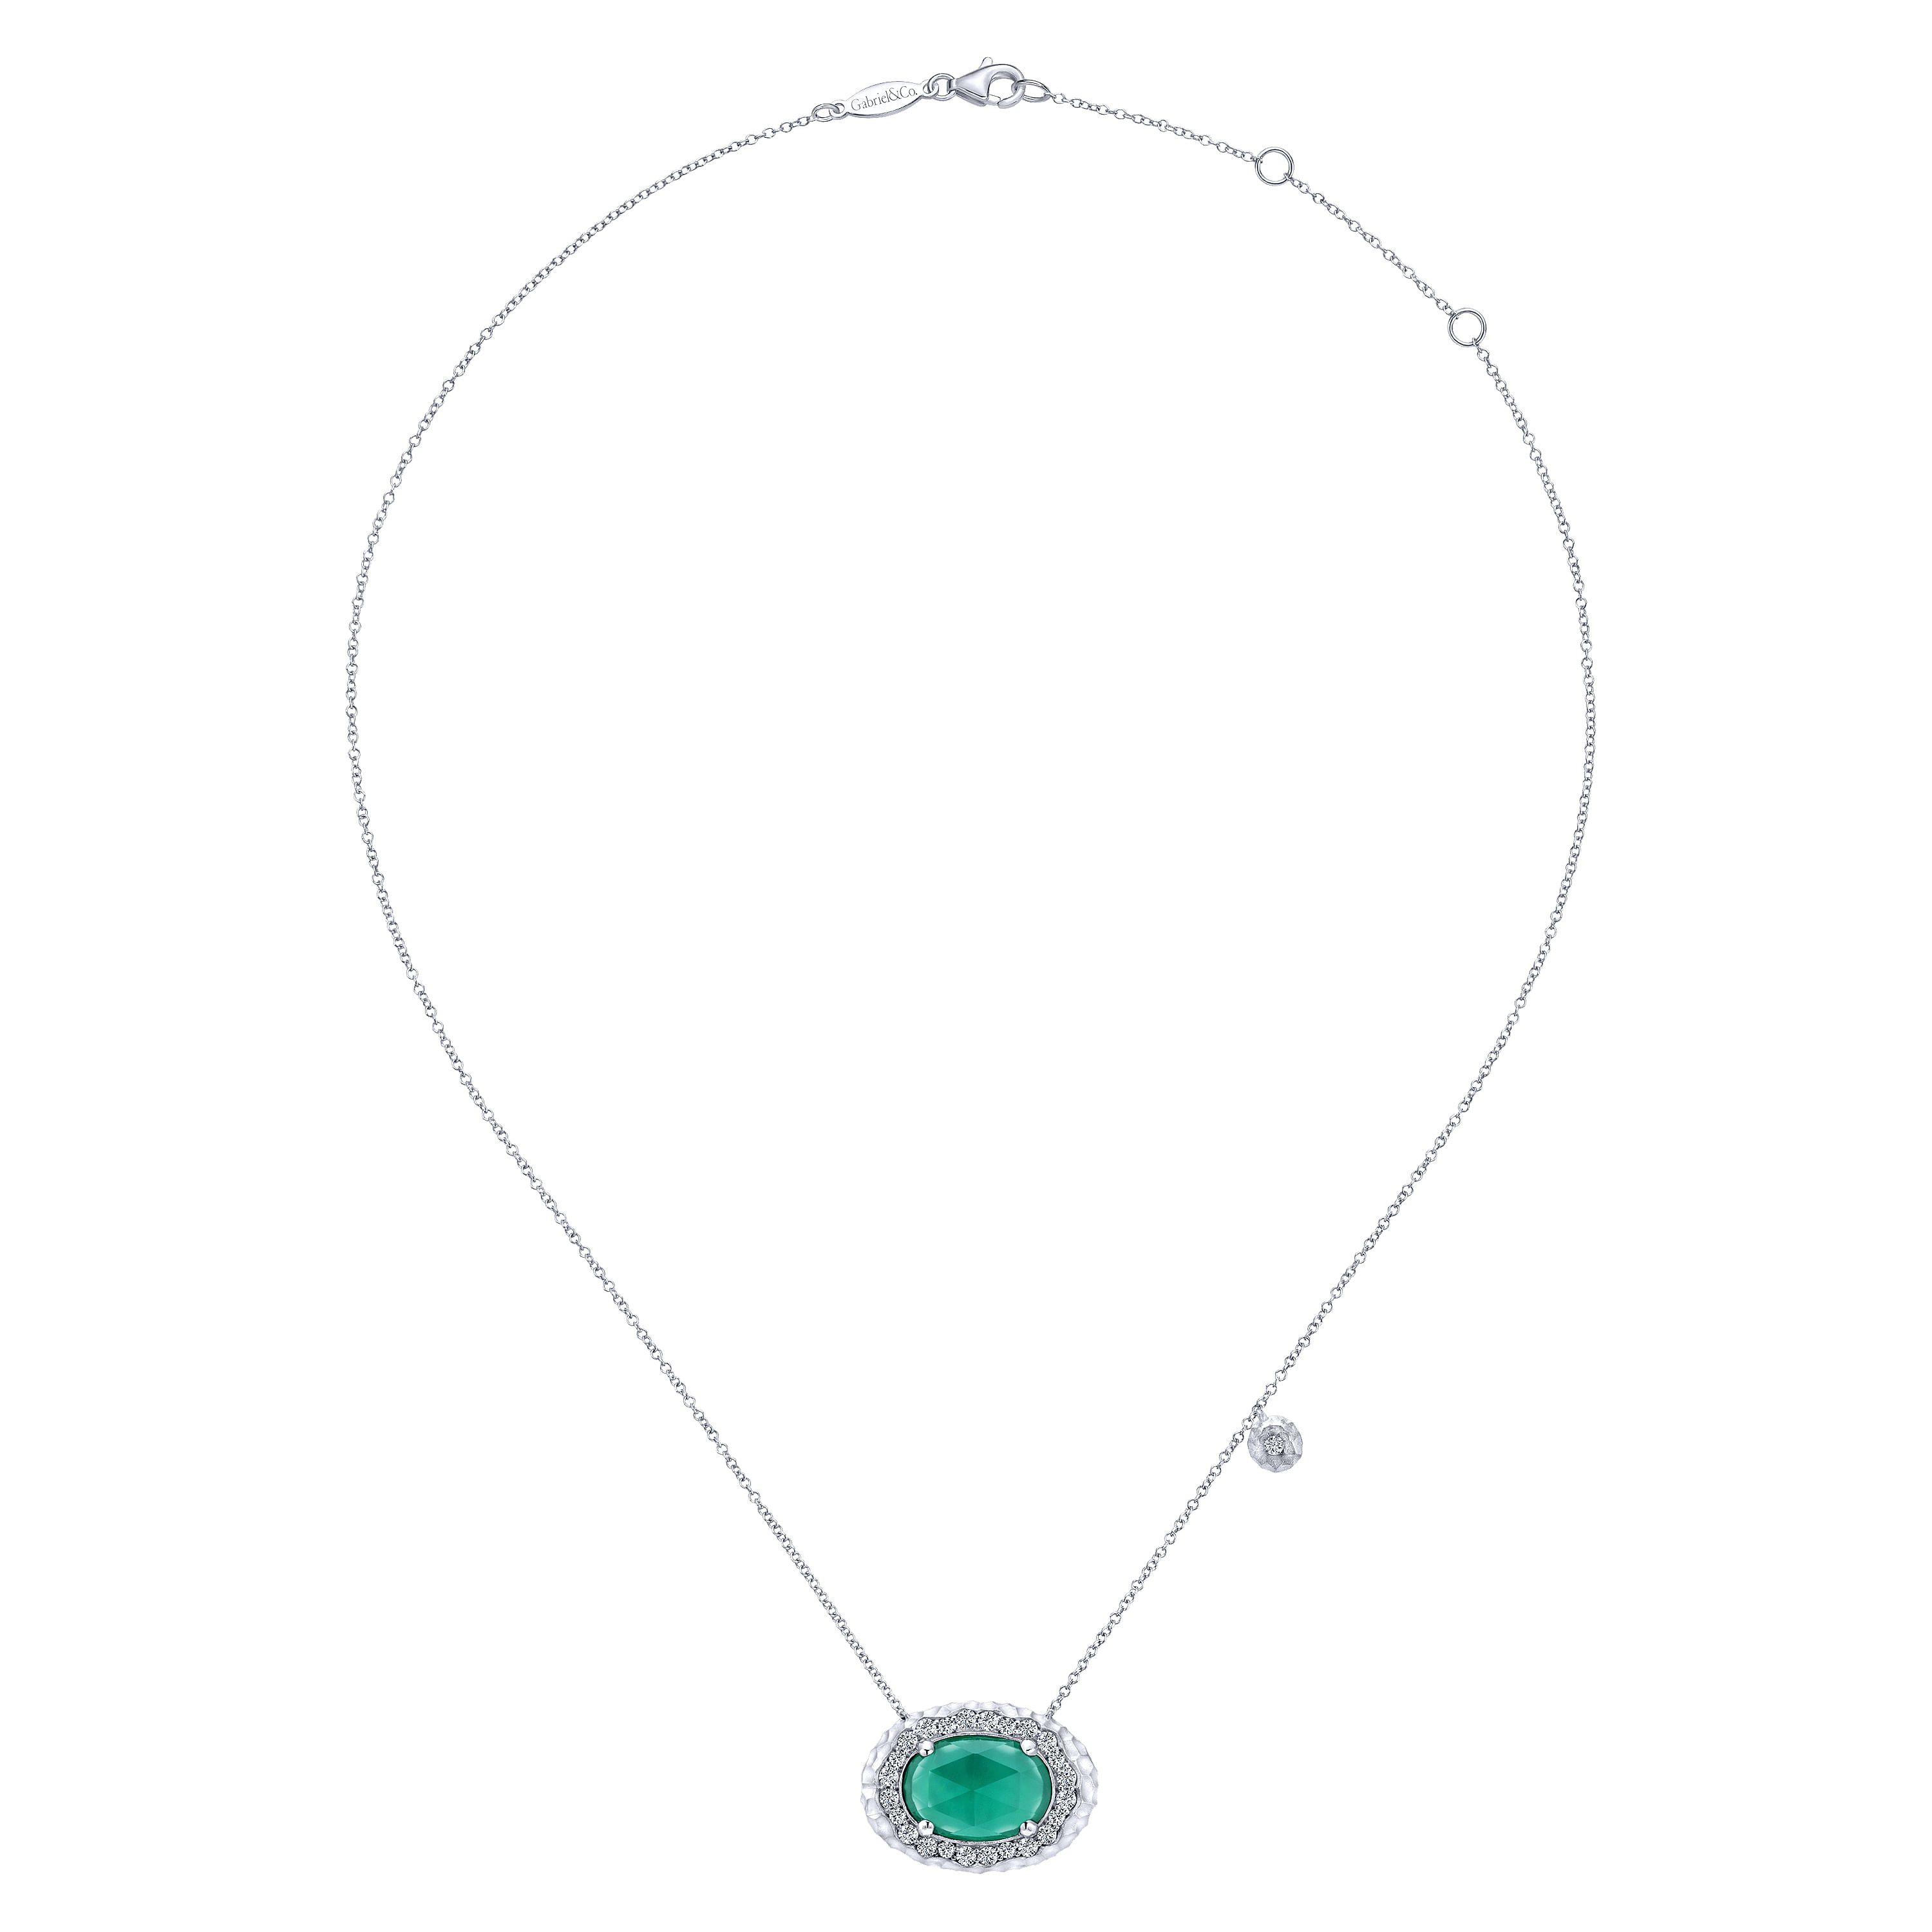 925 Sterling Silver Rock Crystal and Green Onyx Fashion Necklace with White Sapphire Halo